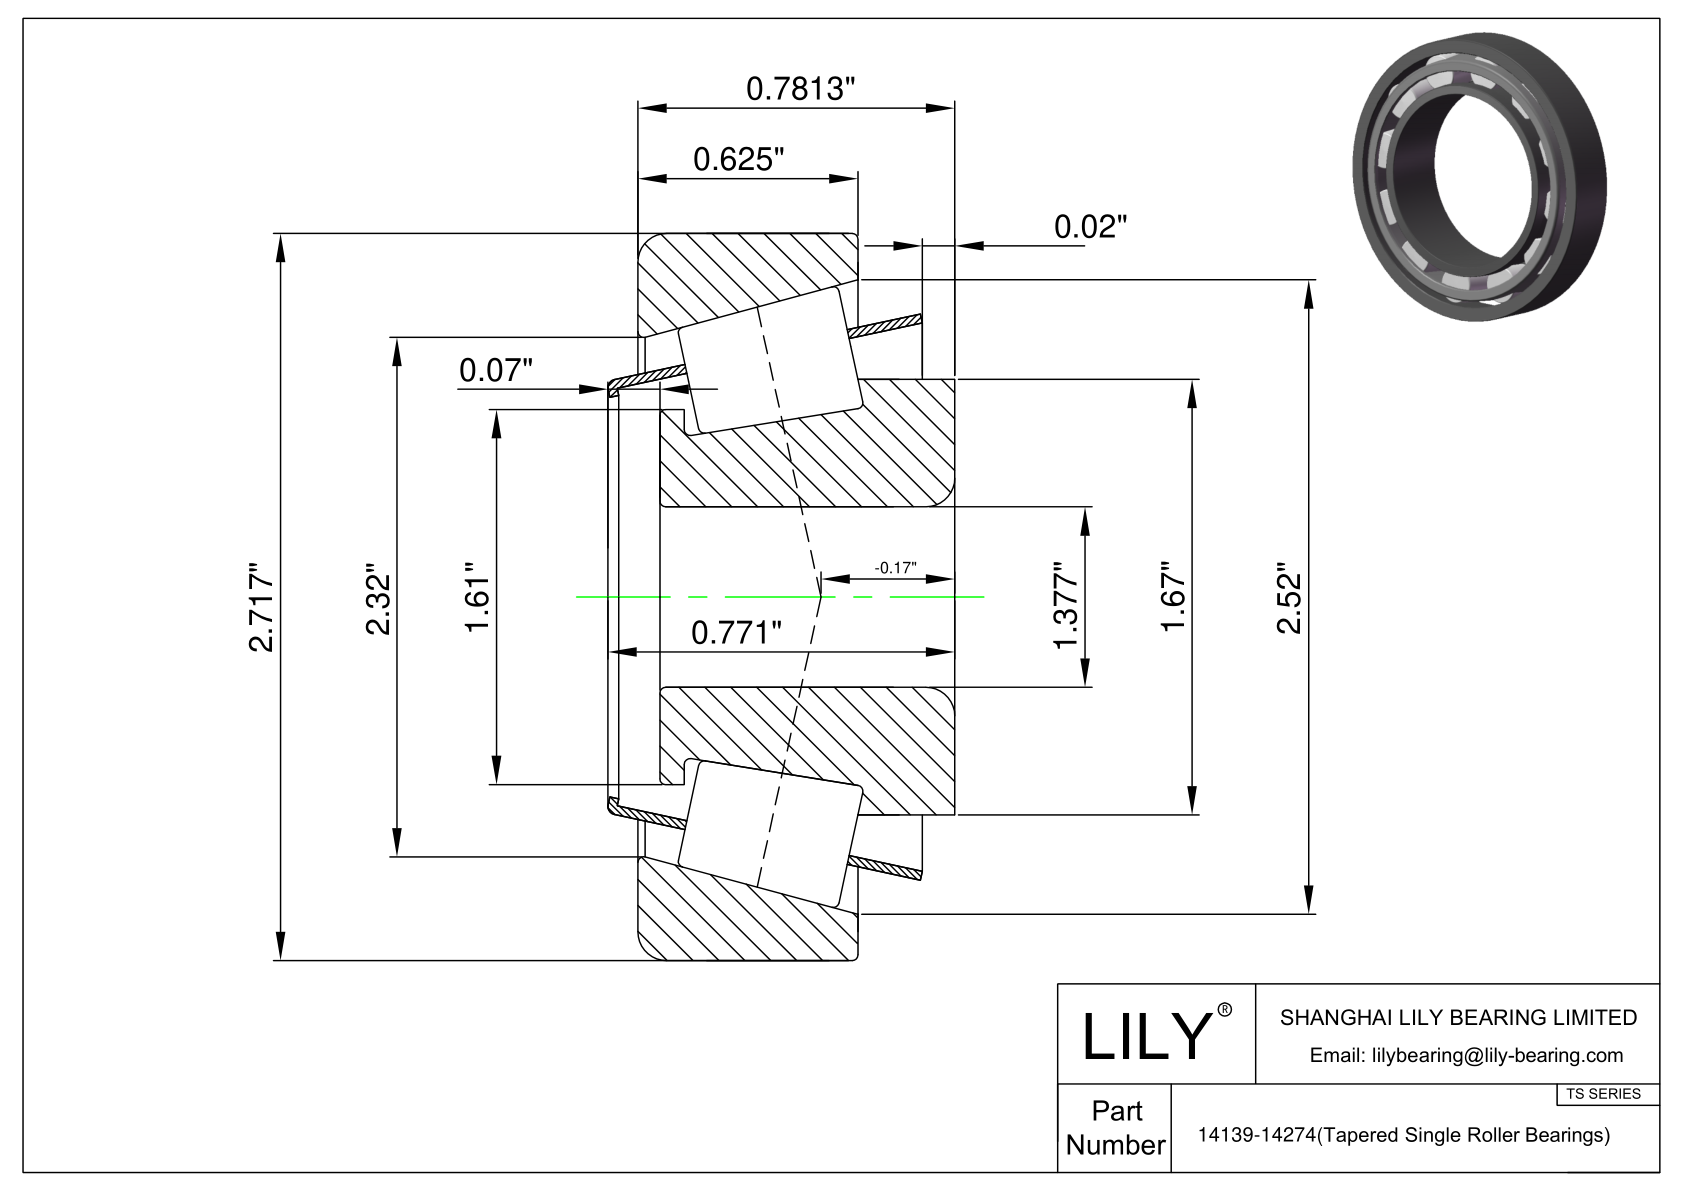 14139-14274 TS (Tapered Single Roller Bearings) (Imperial) cad drawing